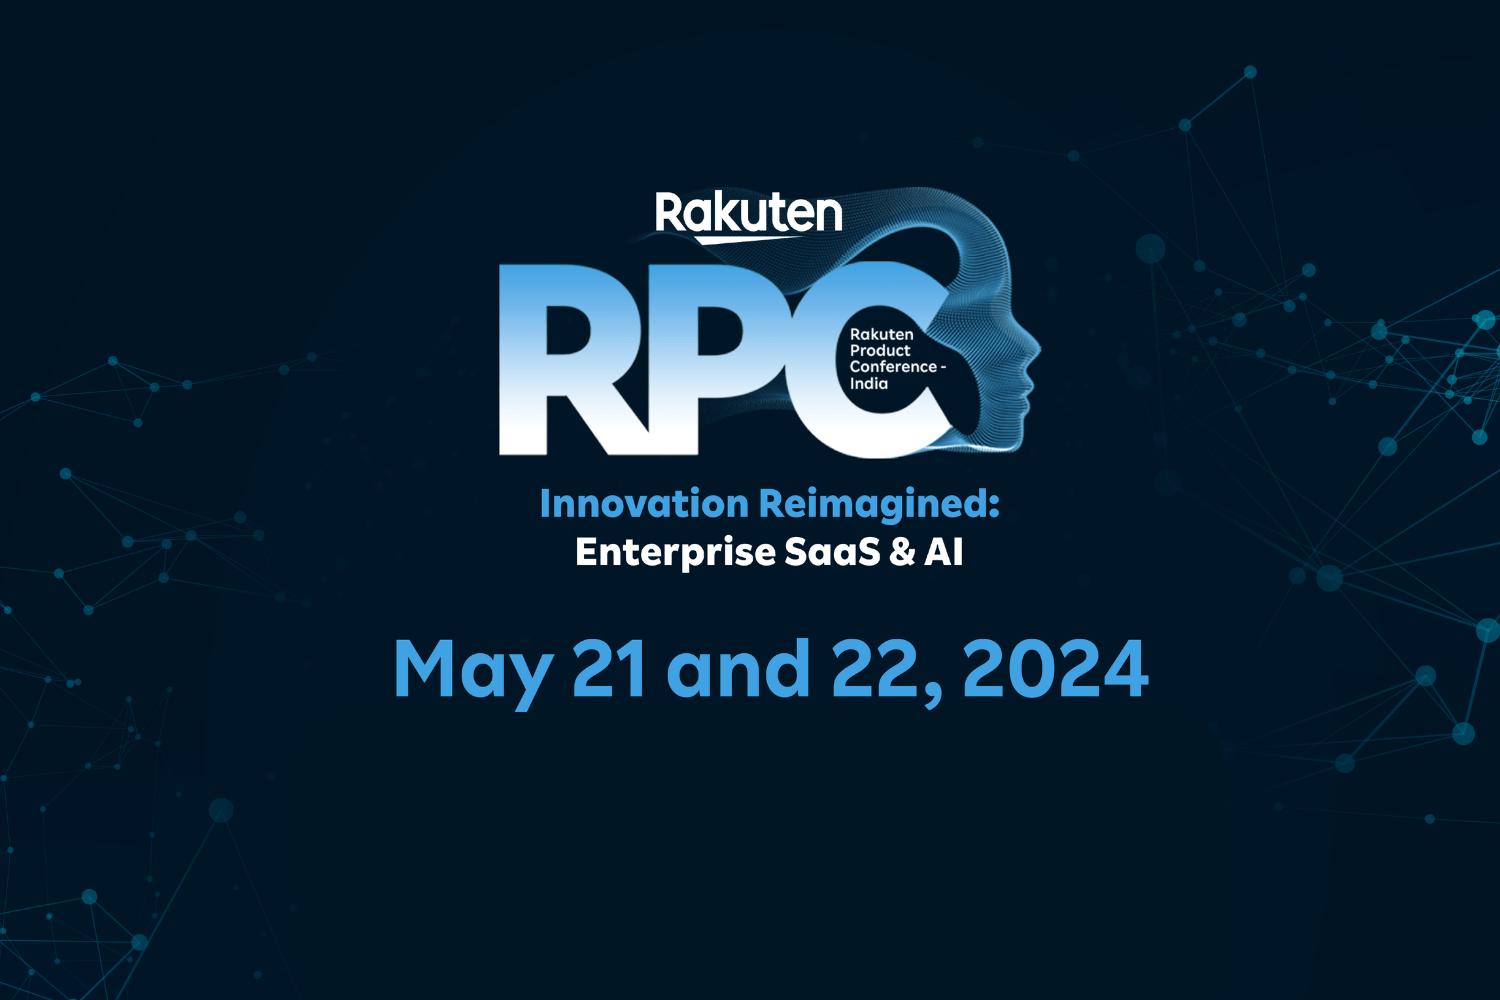 Rakuten Product Conference, the flagship event from Rakuten India, is set to take place virtually on May 21 and 22 2024 under the theme of ‘reimagining innovation’.